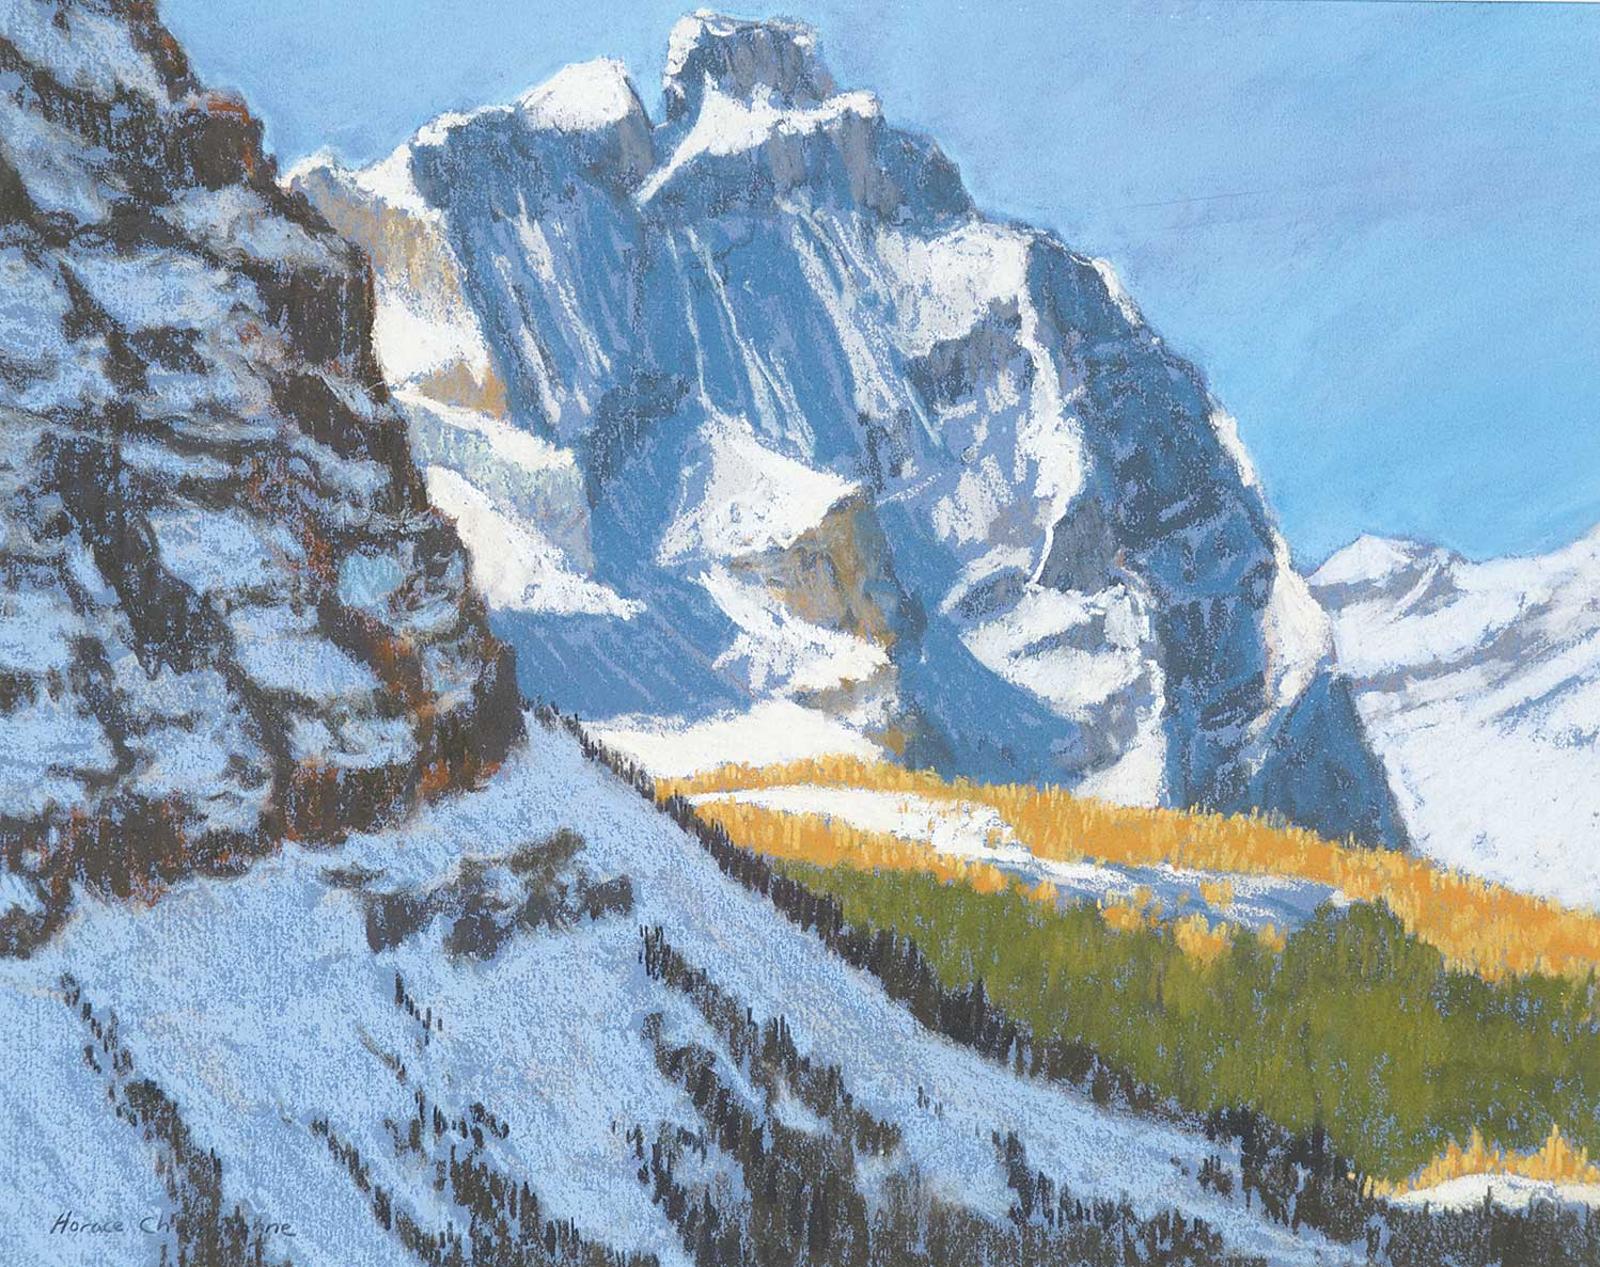 Horace Champagne (1937) - Larches, Mt. Shaffer